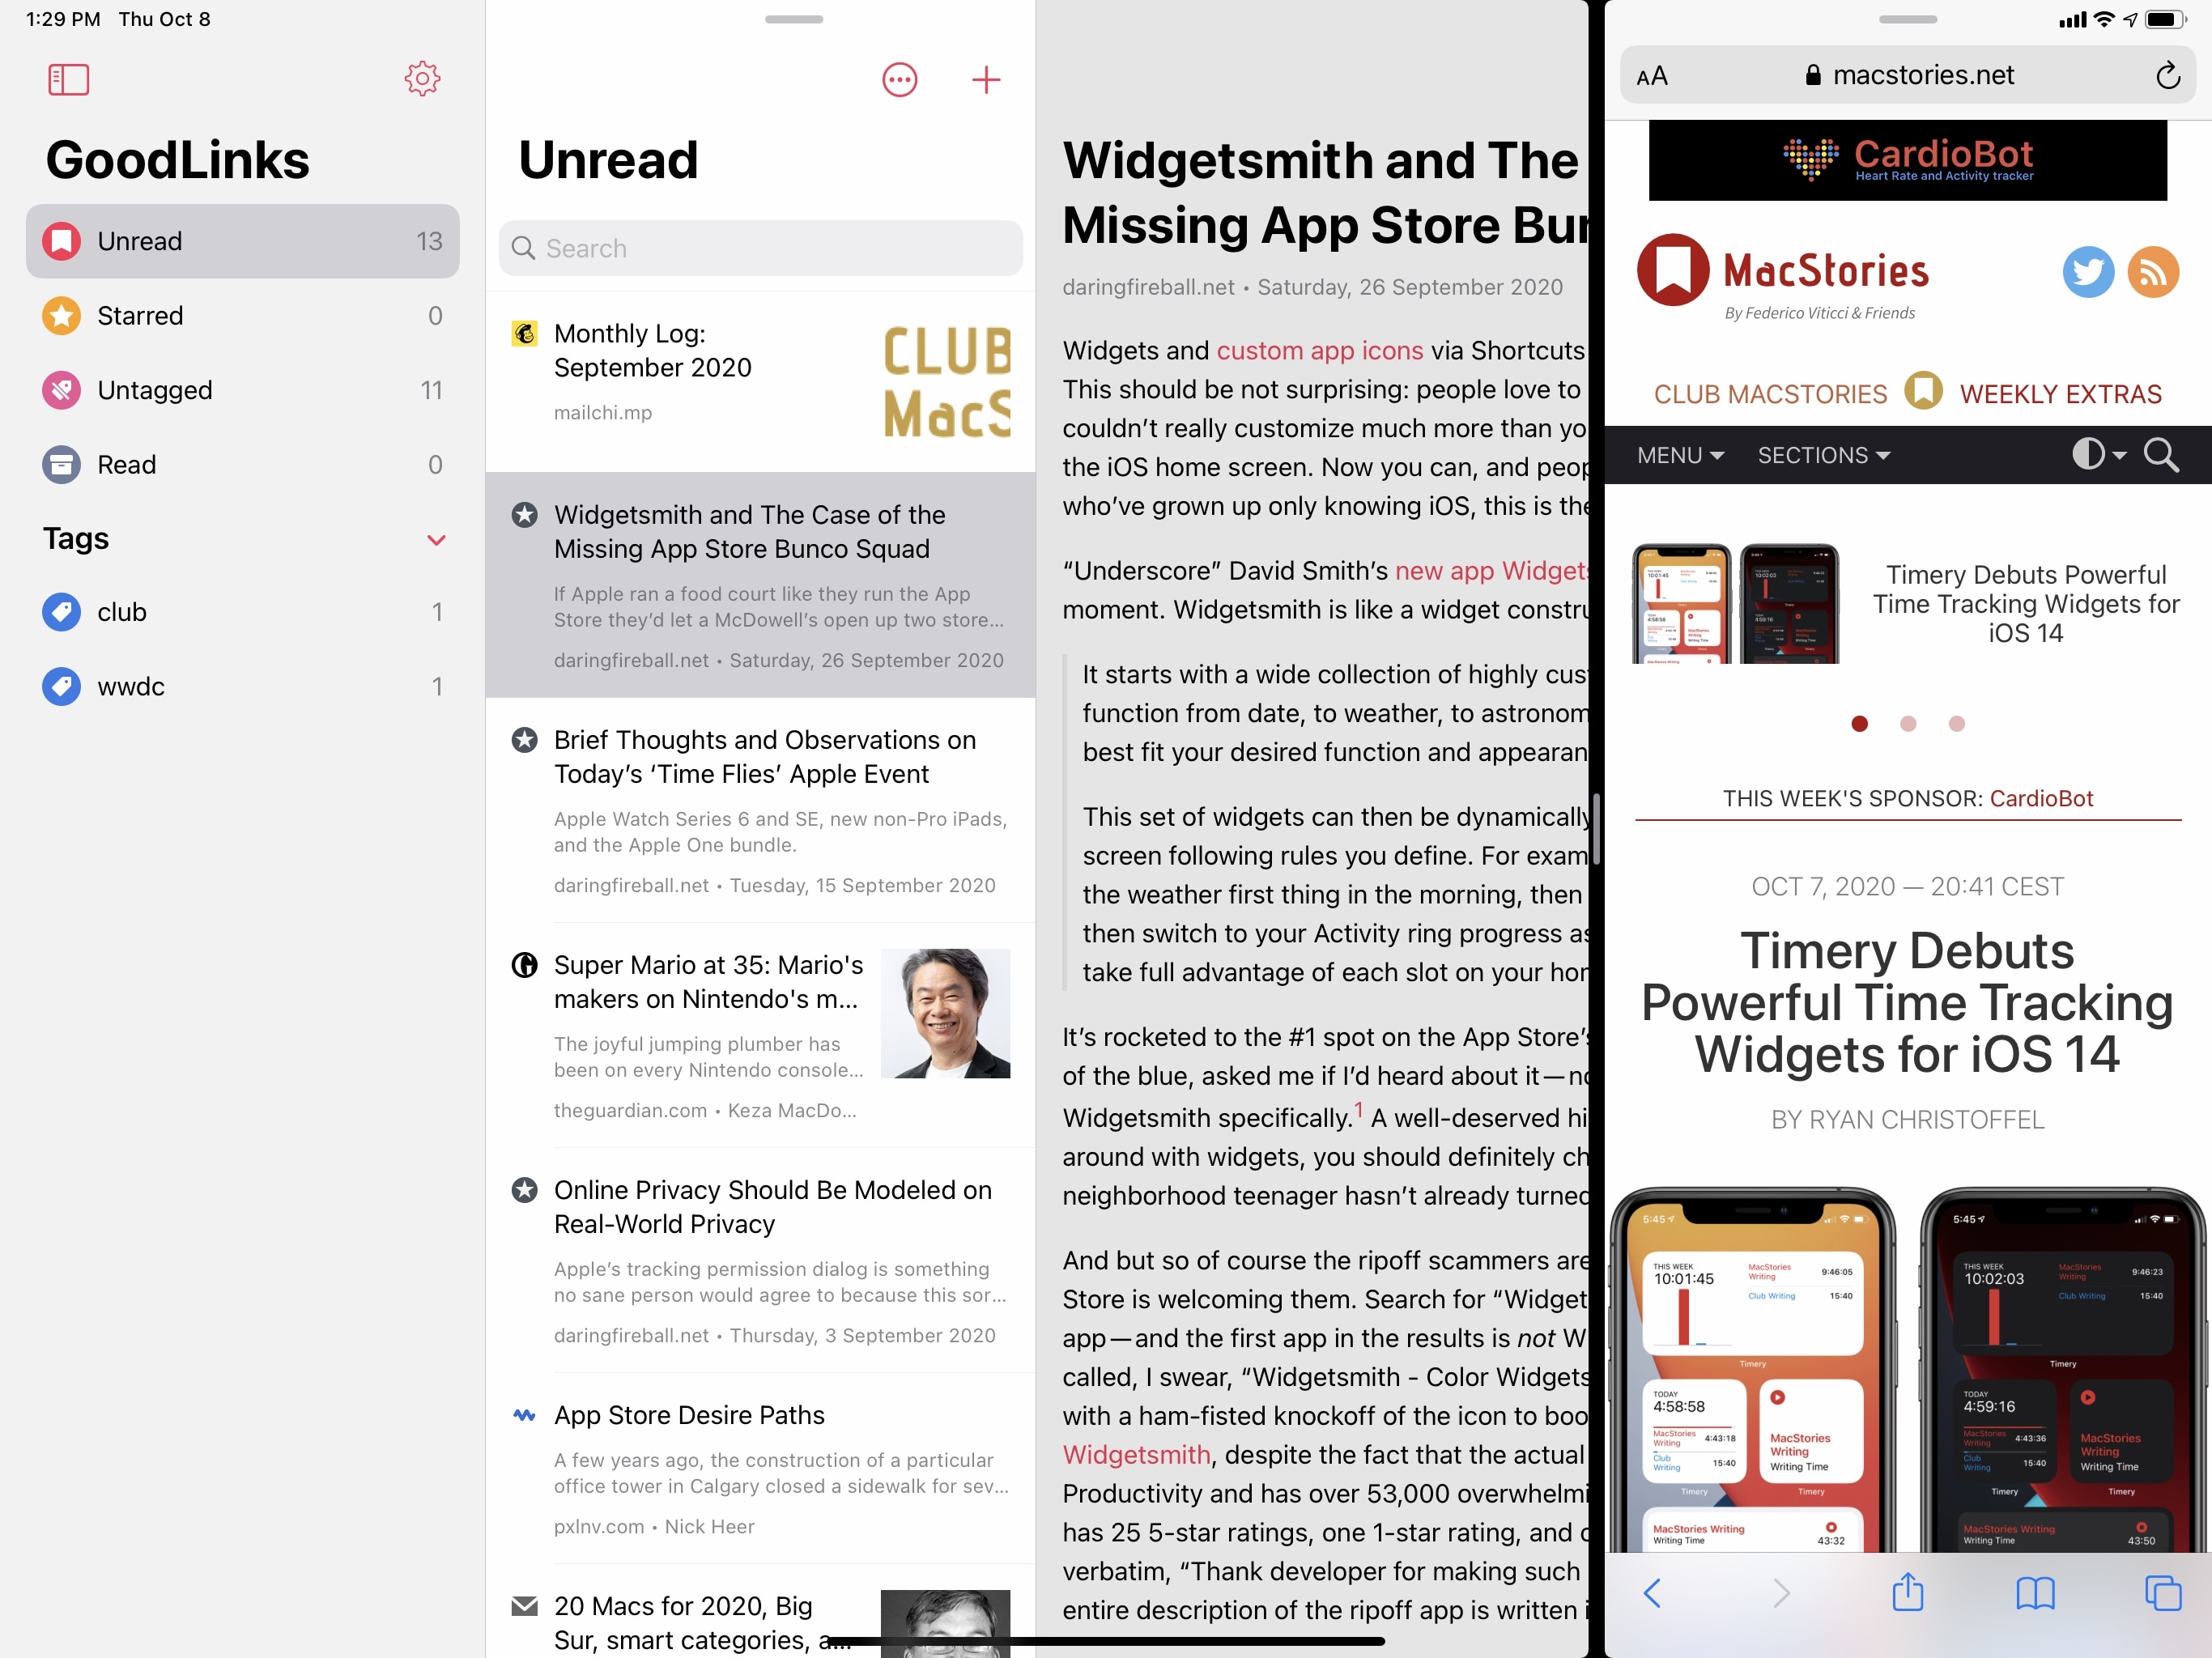 GoodLinks pushes the third column off to the side when a secondary app is added in Split View.